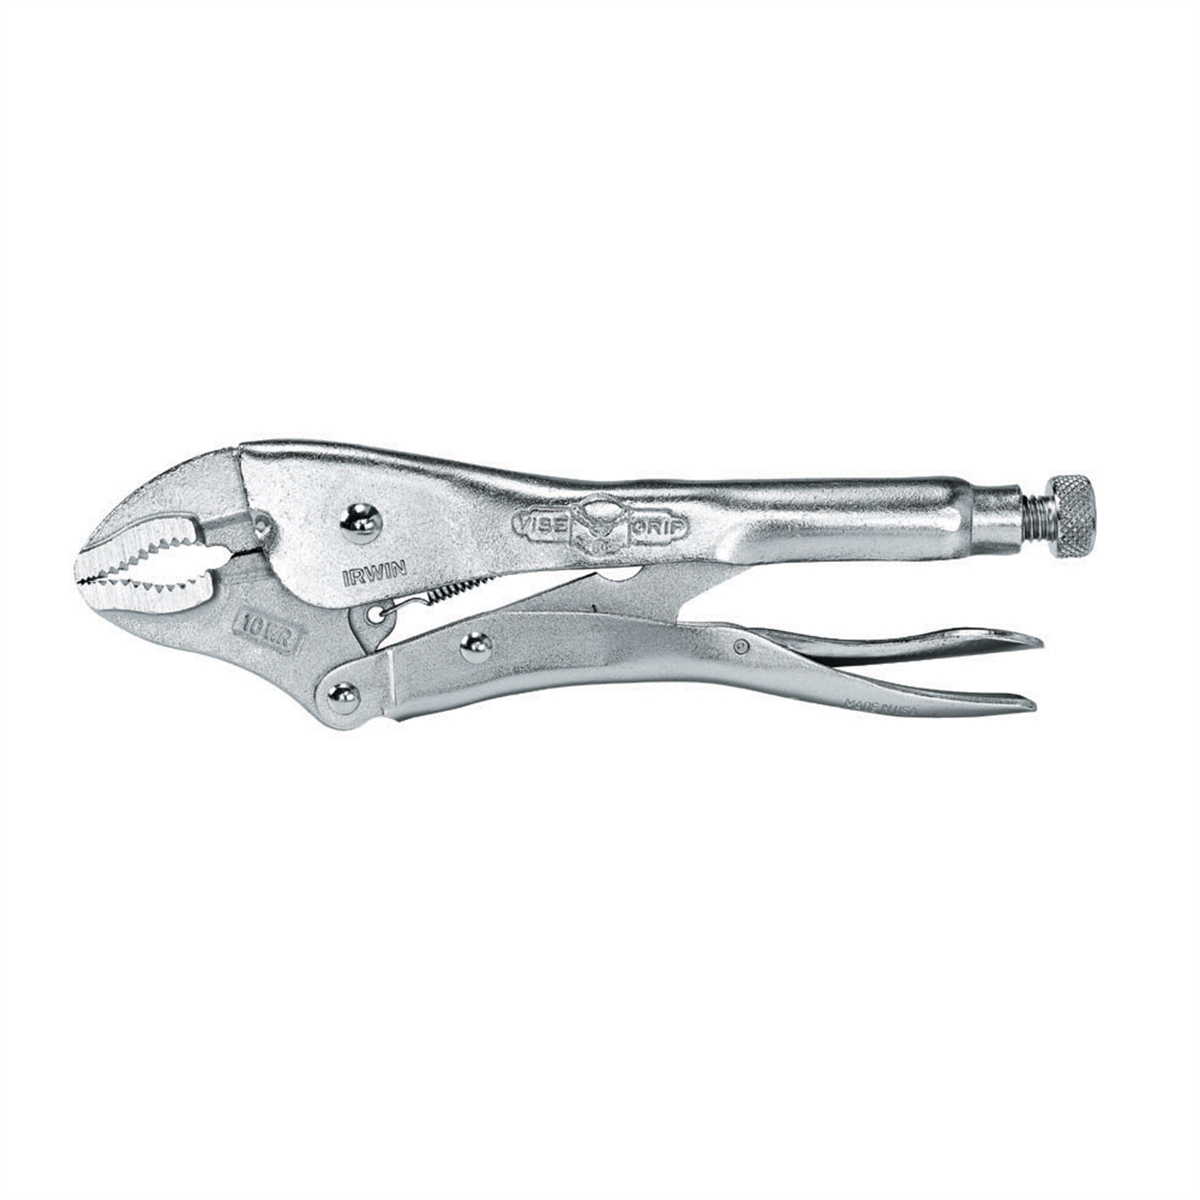 IRWIN 502L3 10-Inch Curved Jaw Locking Pliers - image 1 of 3